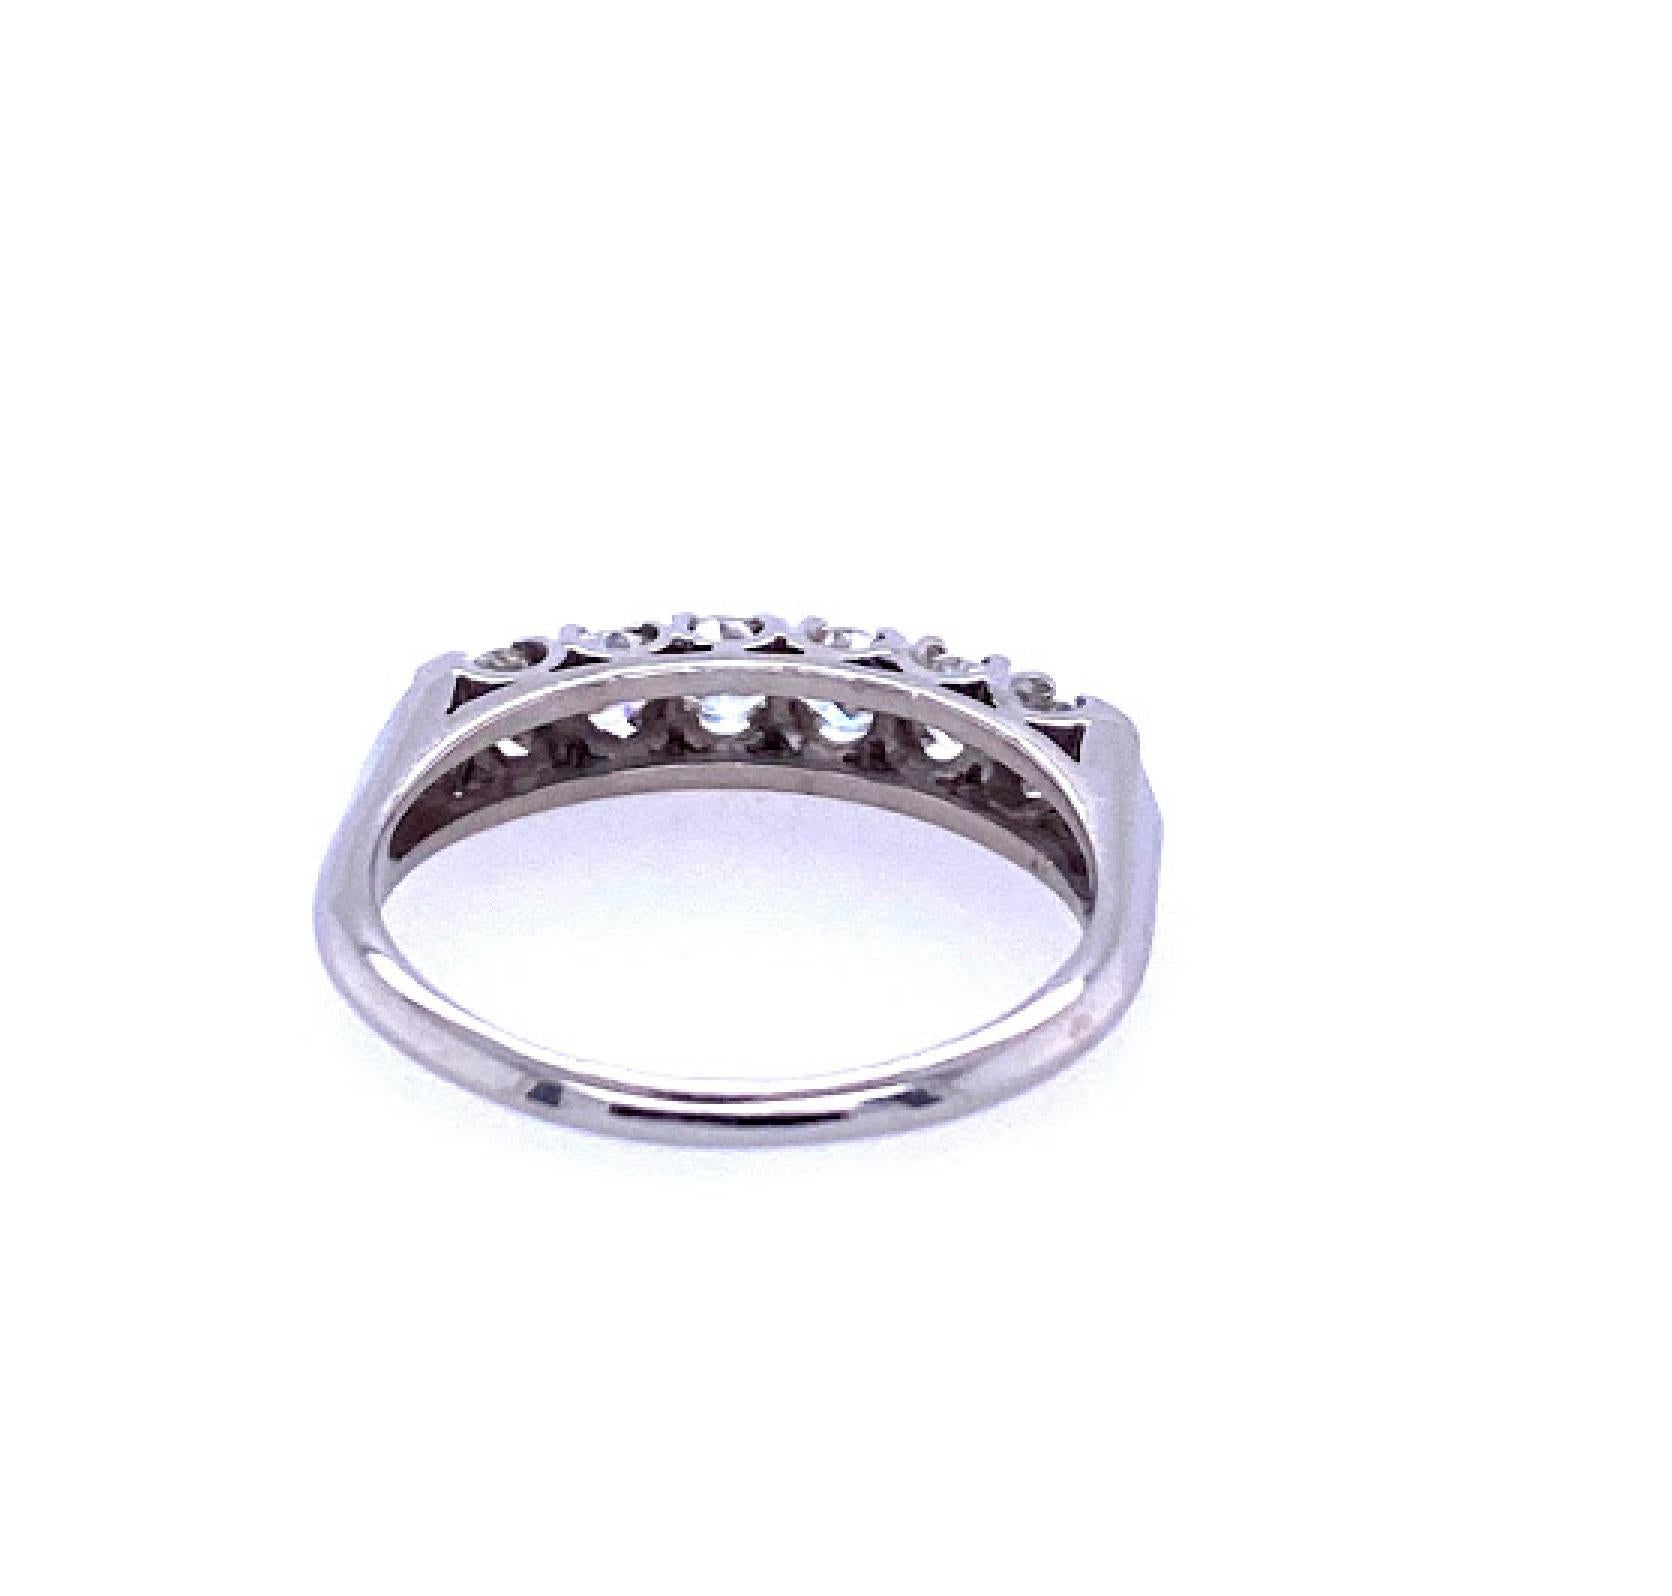 Platinum (stamped 10% IRID PLAT) ring with 6 prong set round brilliant diamonds. The diamonds weigh 0.75 carat total weight, and are in the H/I color range, and SI clarity. The ring’s shank measures 3.5 mm and tapers to 1.5 mm at the base. The ring